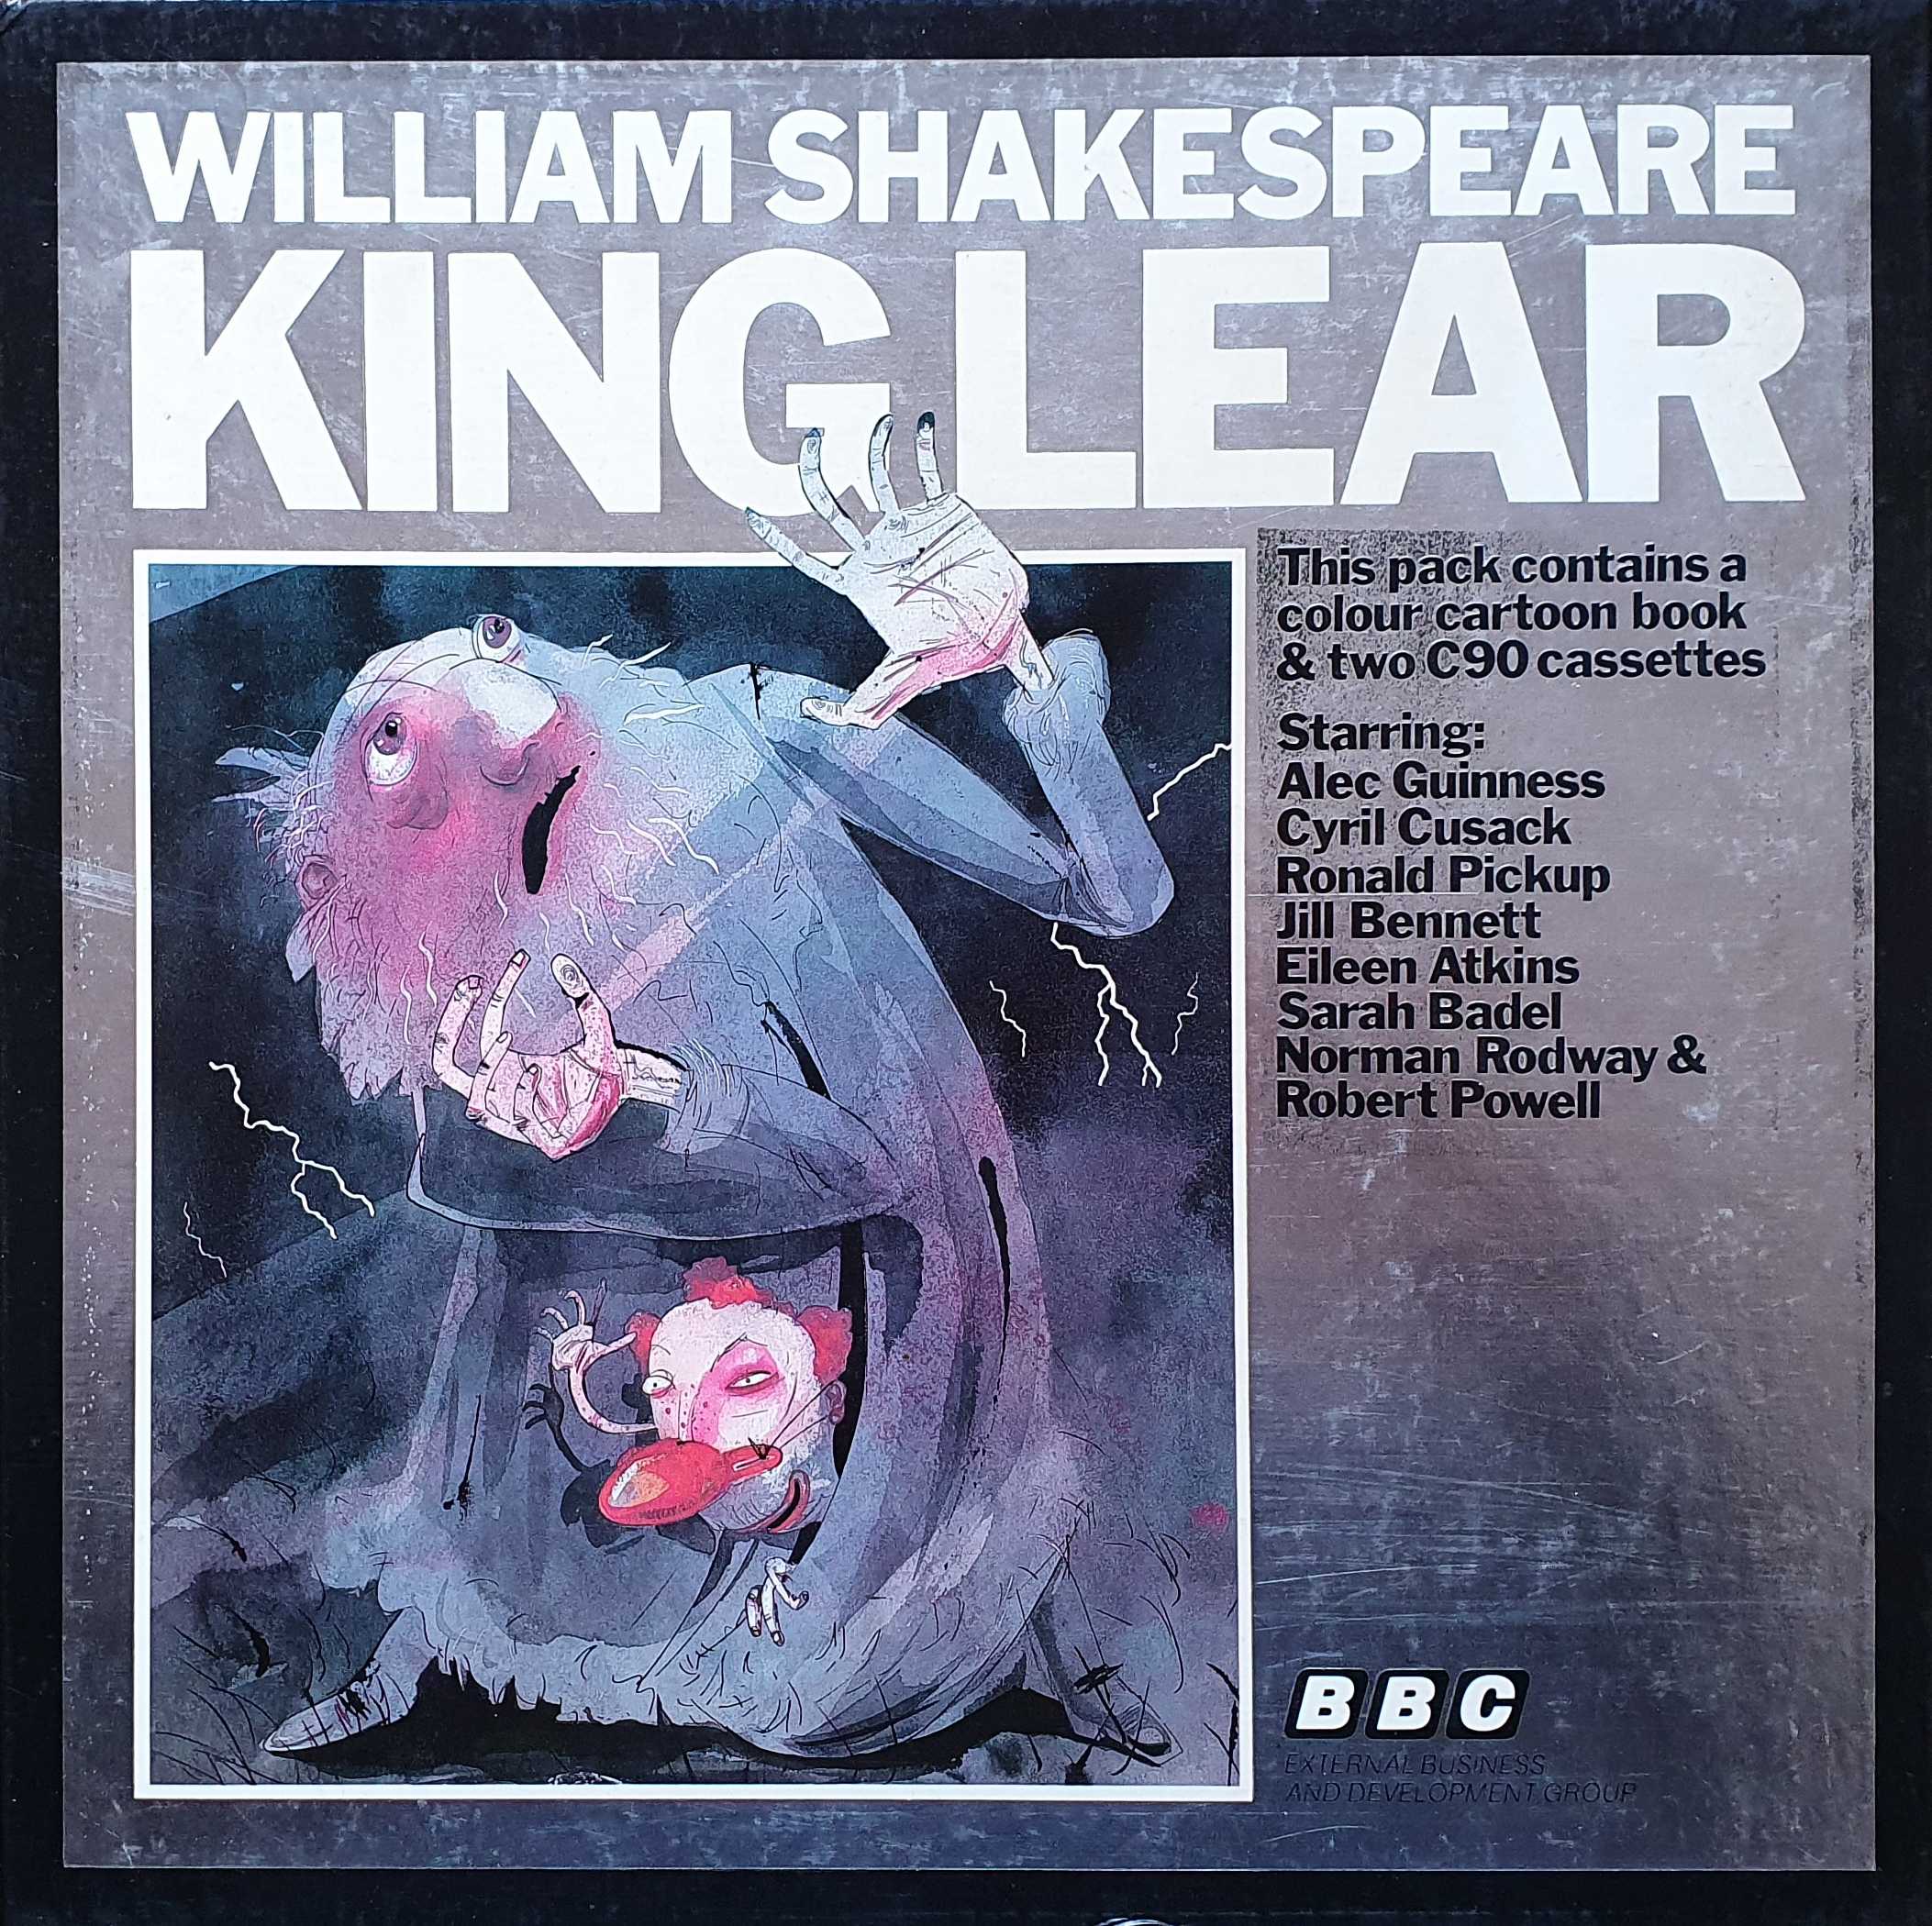 Picture of ZCWSS 2 King Lear by artist William Shakespeare from the BBC cassettes - Records and Tapes library